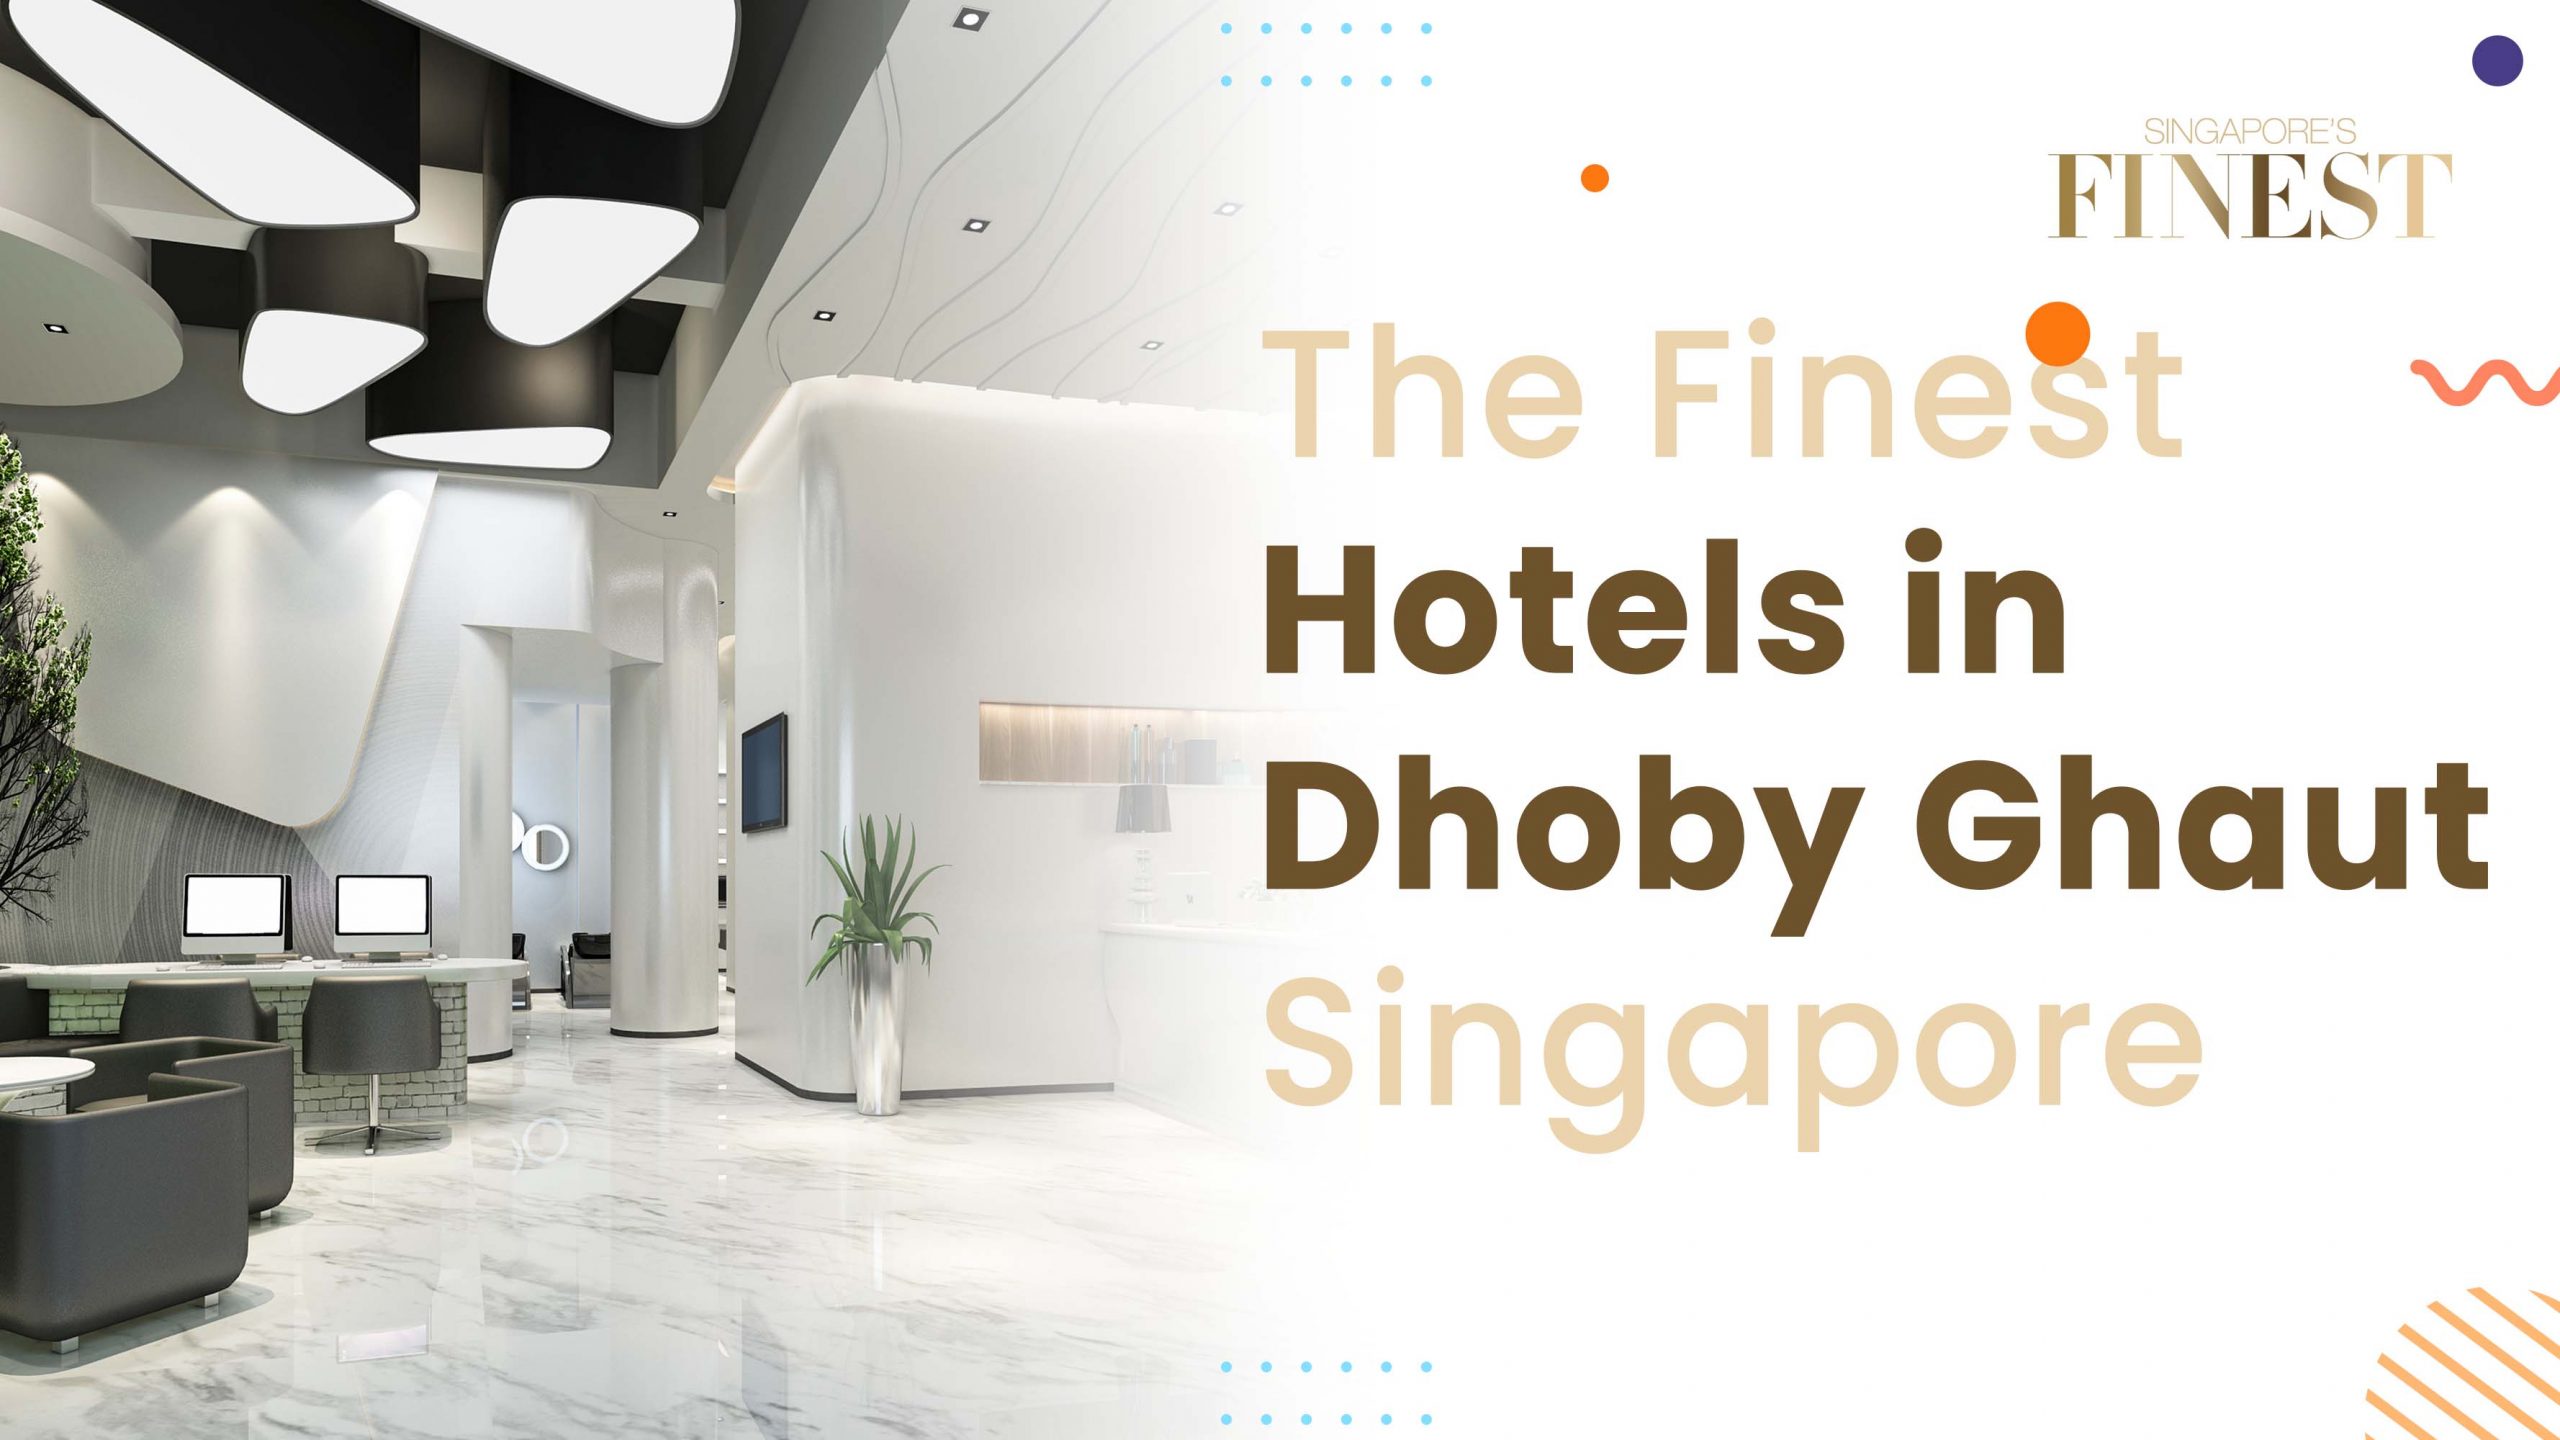 The 10 Finest Hotels in Dhoby Ghaut Singapore